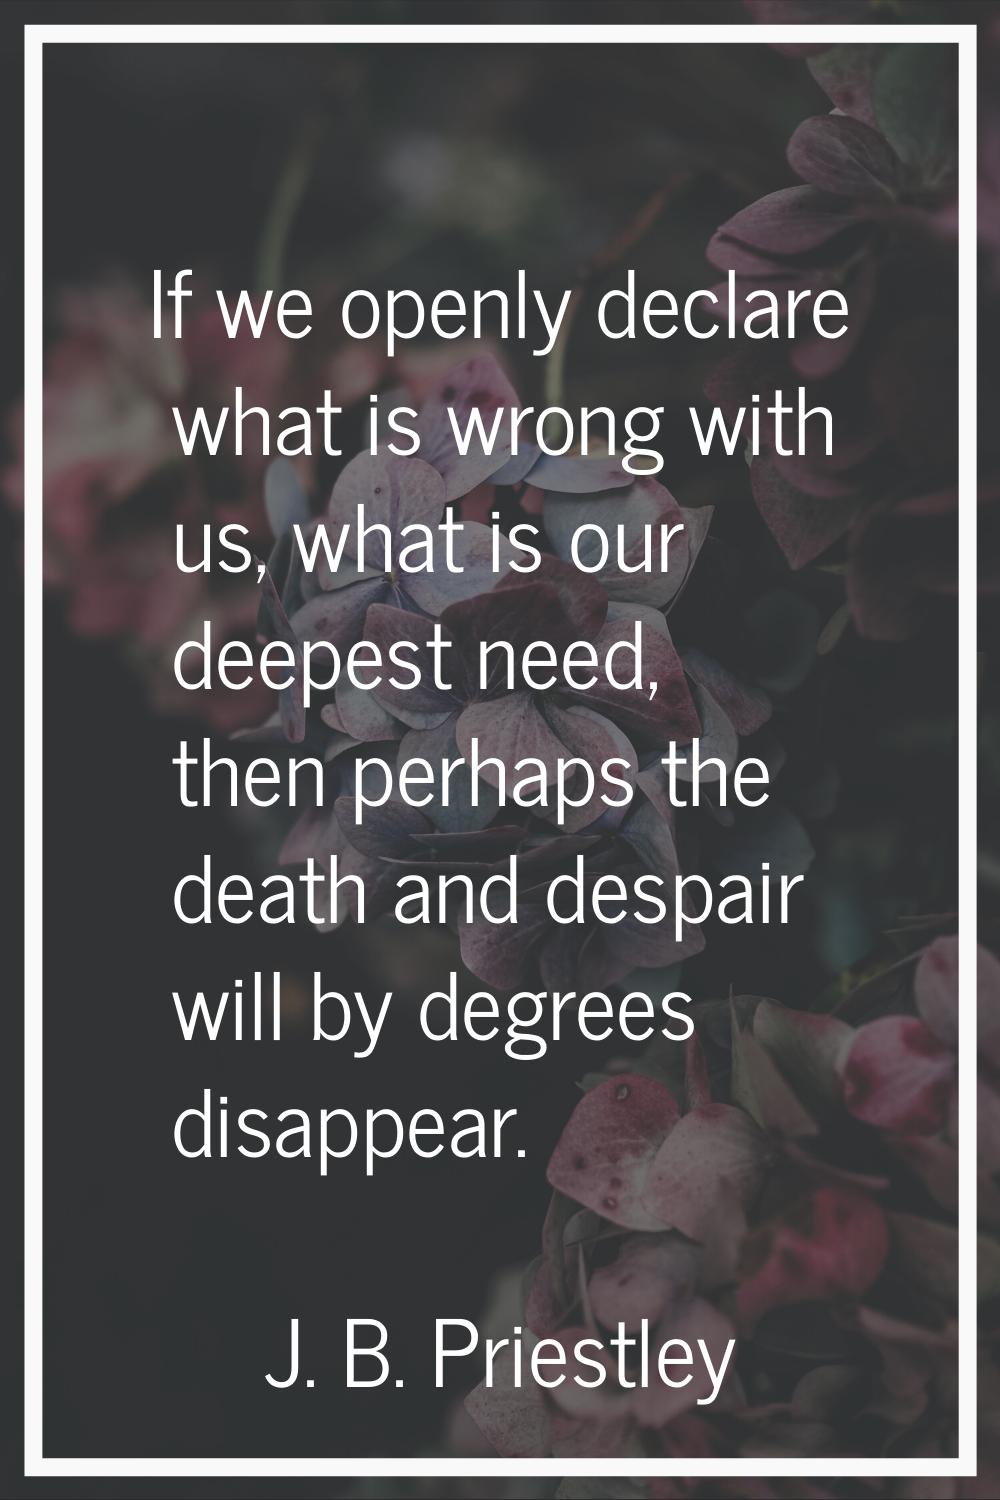 If we openly declare what is wrong with us, what is our deepest need, then perhaps the death and de